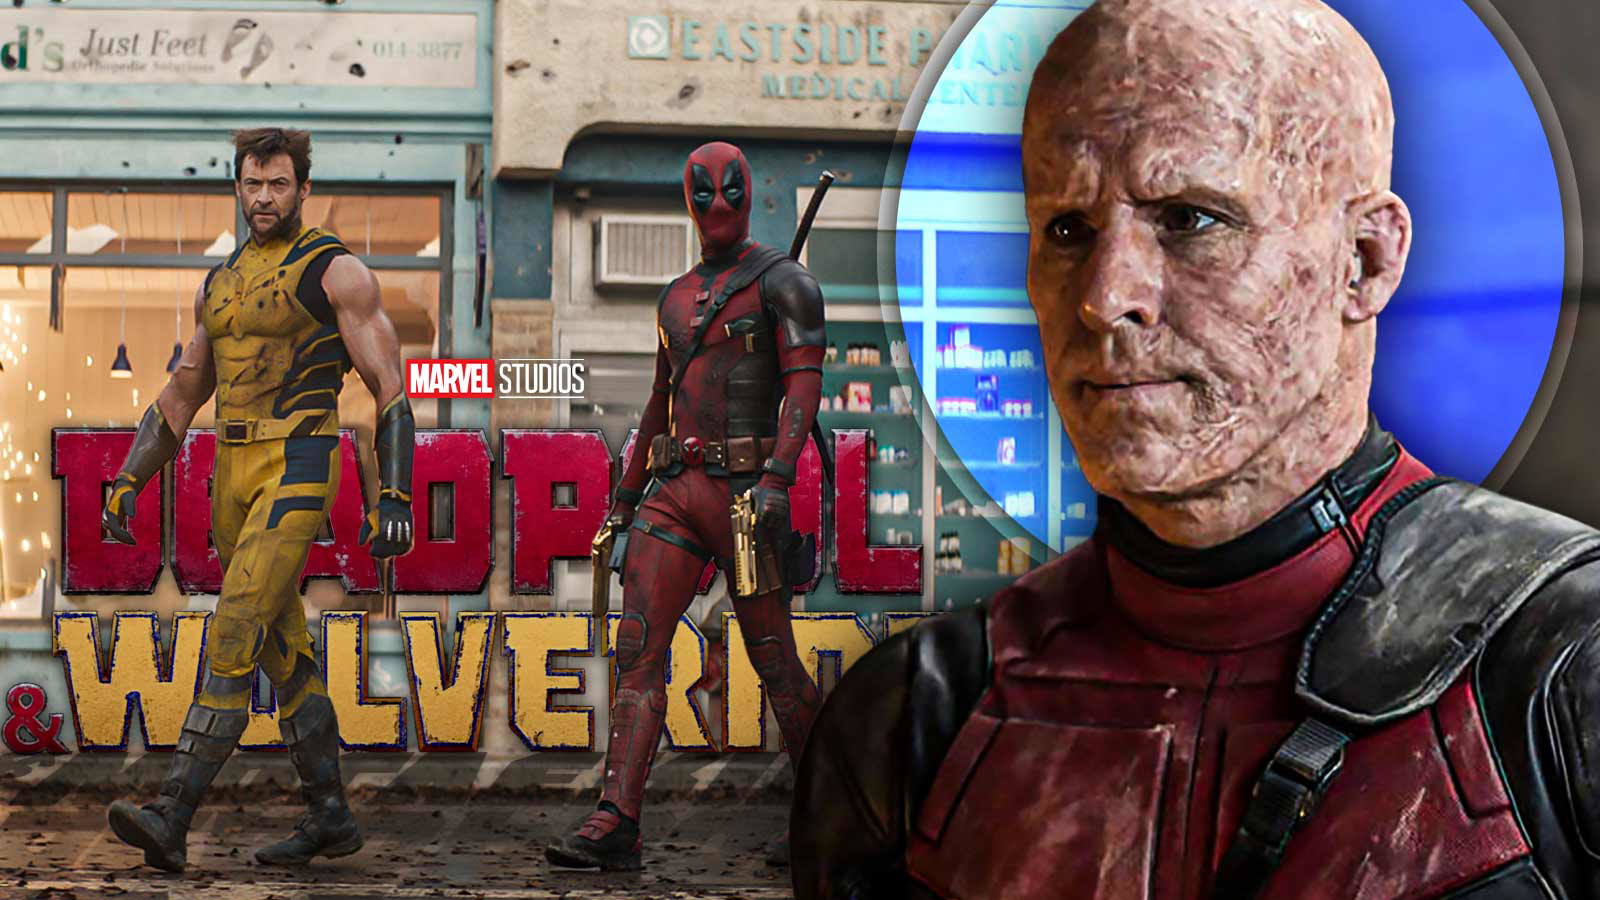 “Its just getting more and more weird”: ‘Deadpool & Wolverine’ Update Has Fans Feeling Disturbed as Ryan Reynolds Film Unveils New Product